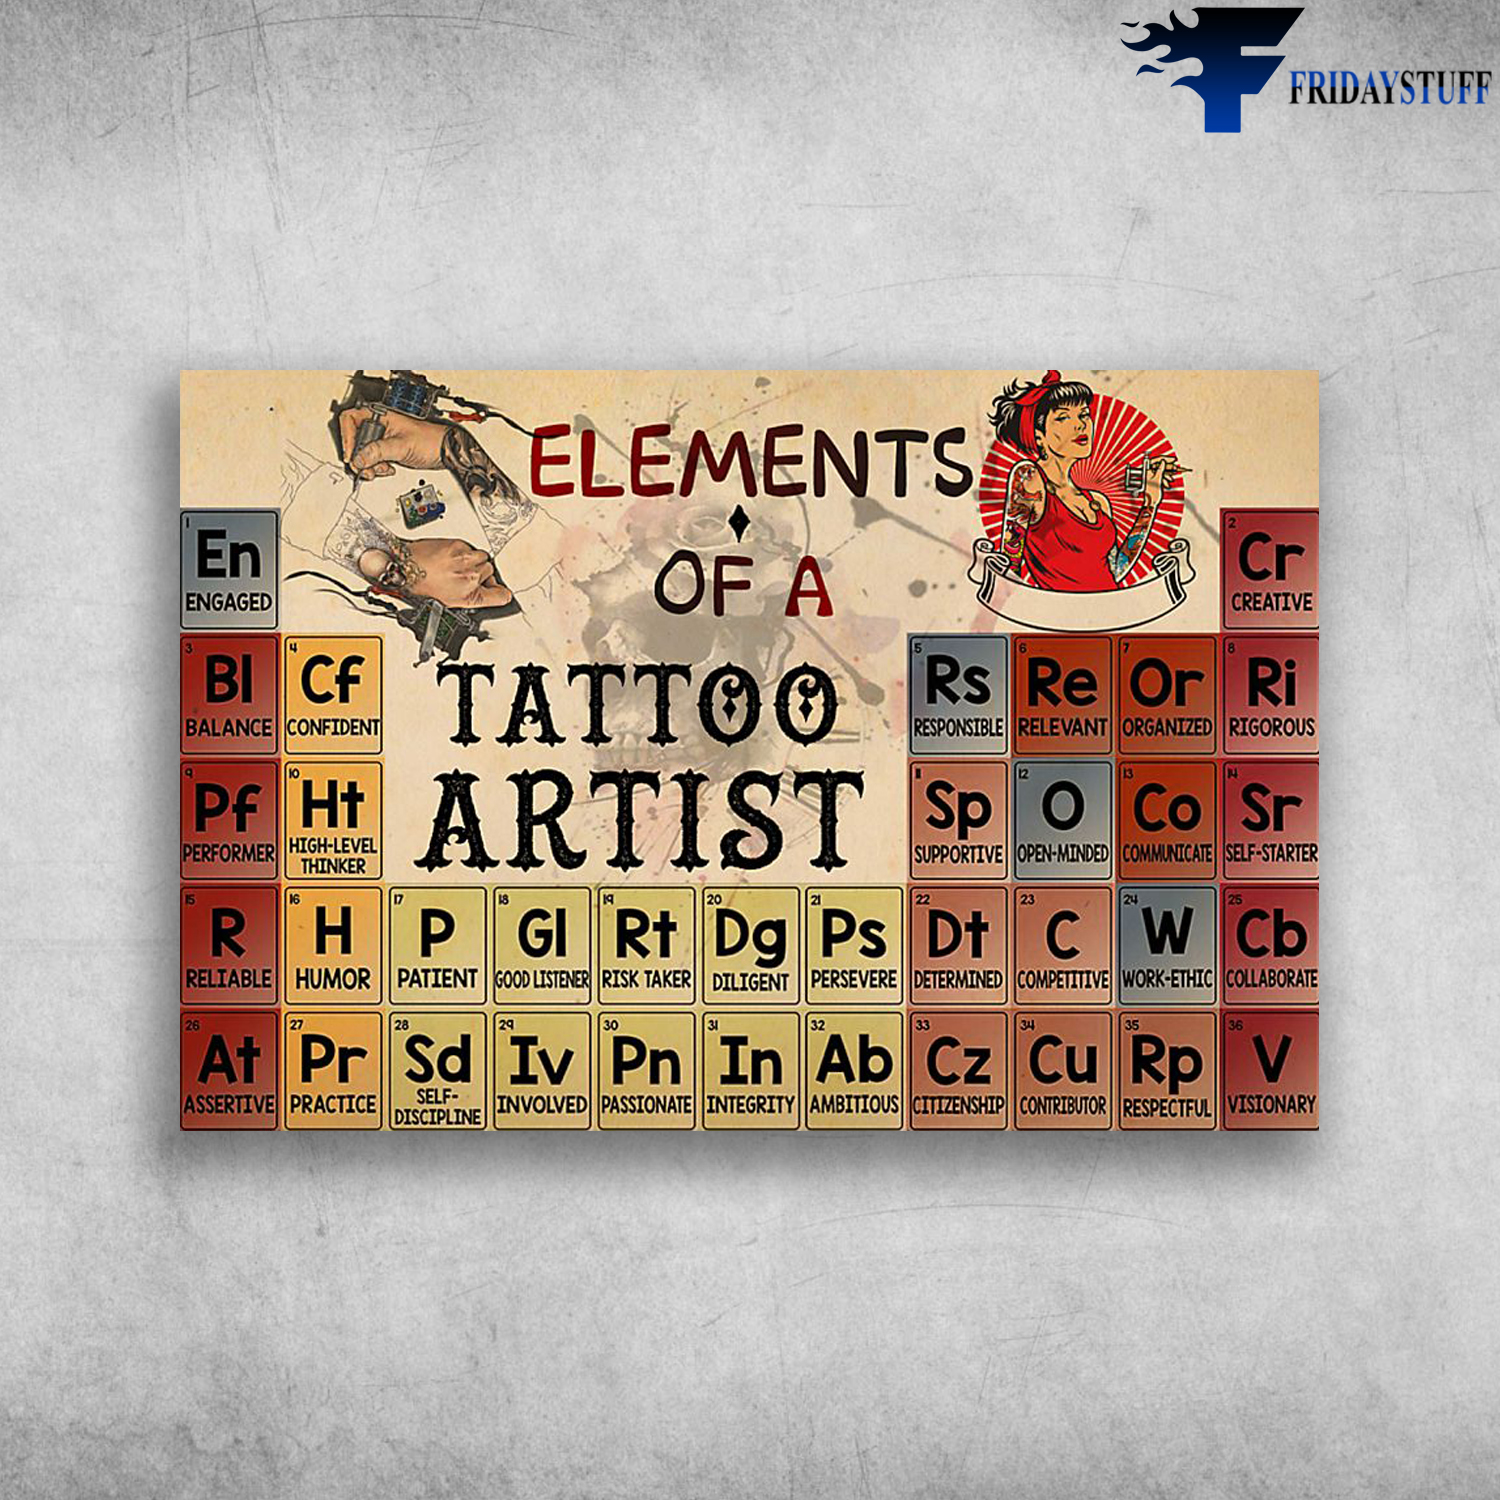 Elements Of A Tattoo Artist Engaged Balance Confident Performer High Level Thinker